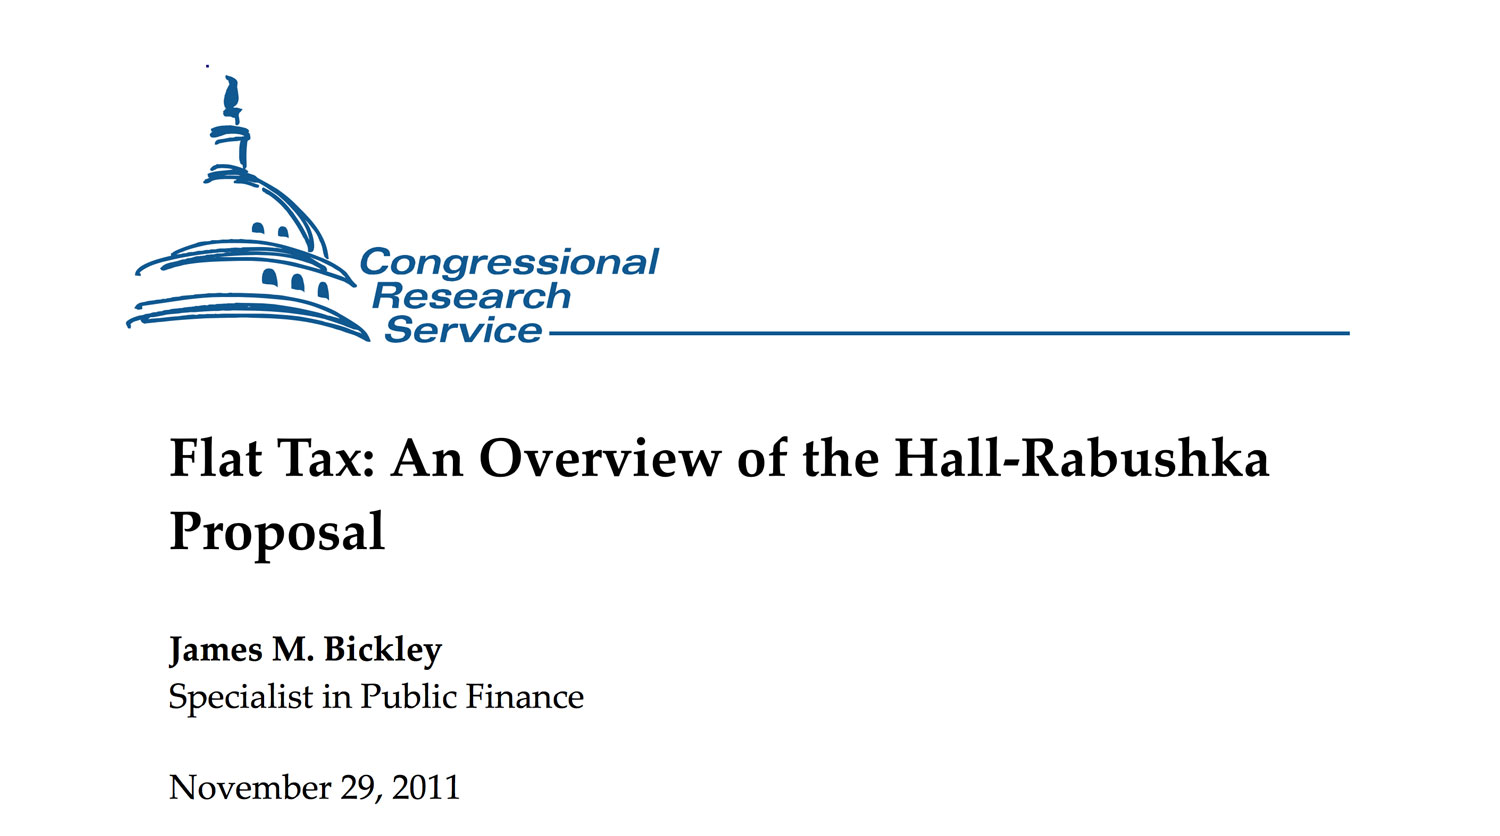 Congressional Research Service, Flat Tax: An Overview of the Hall-Rabushka Proposal